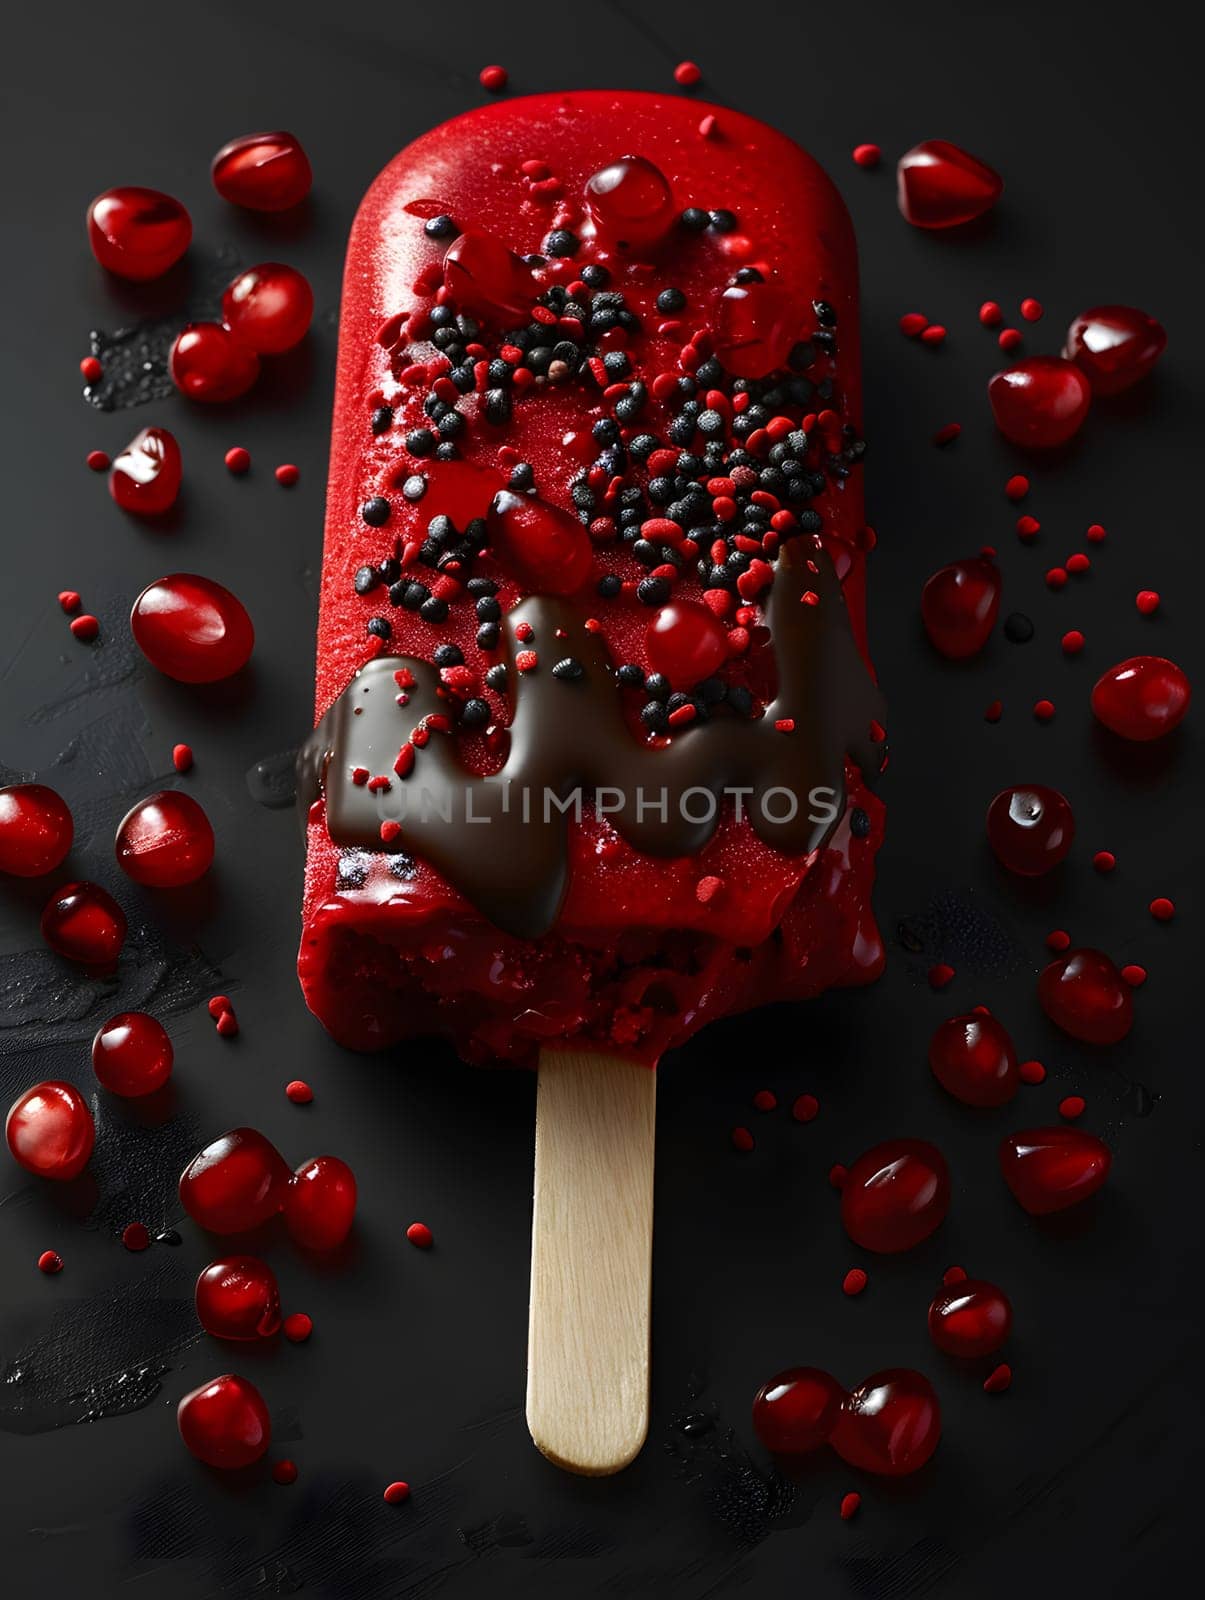 A refreshing red popsicle made with pomegranate seeds, water, and natural ingredients. Topped with chocolate sprinkles for a delicious treat